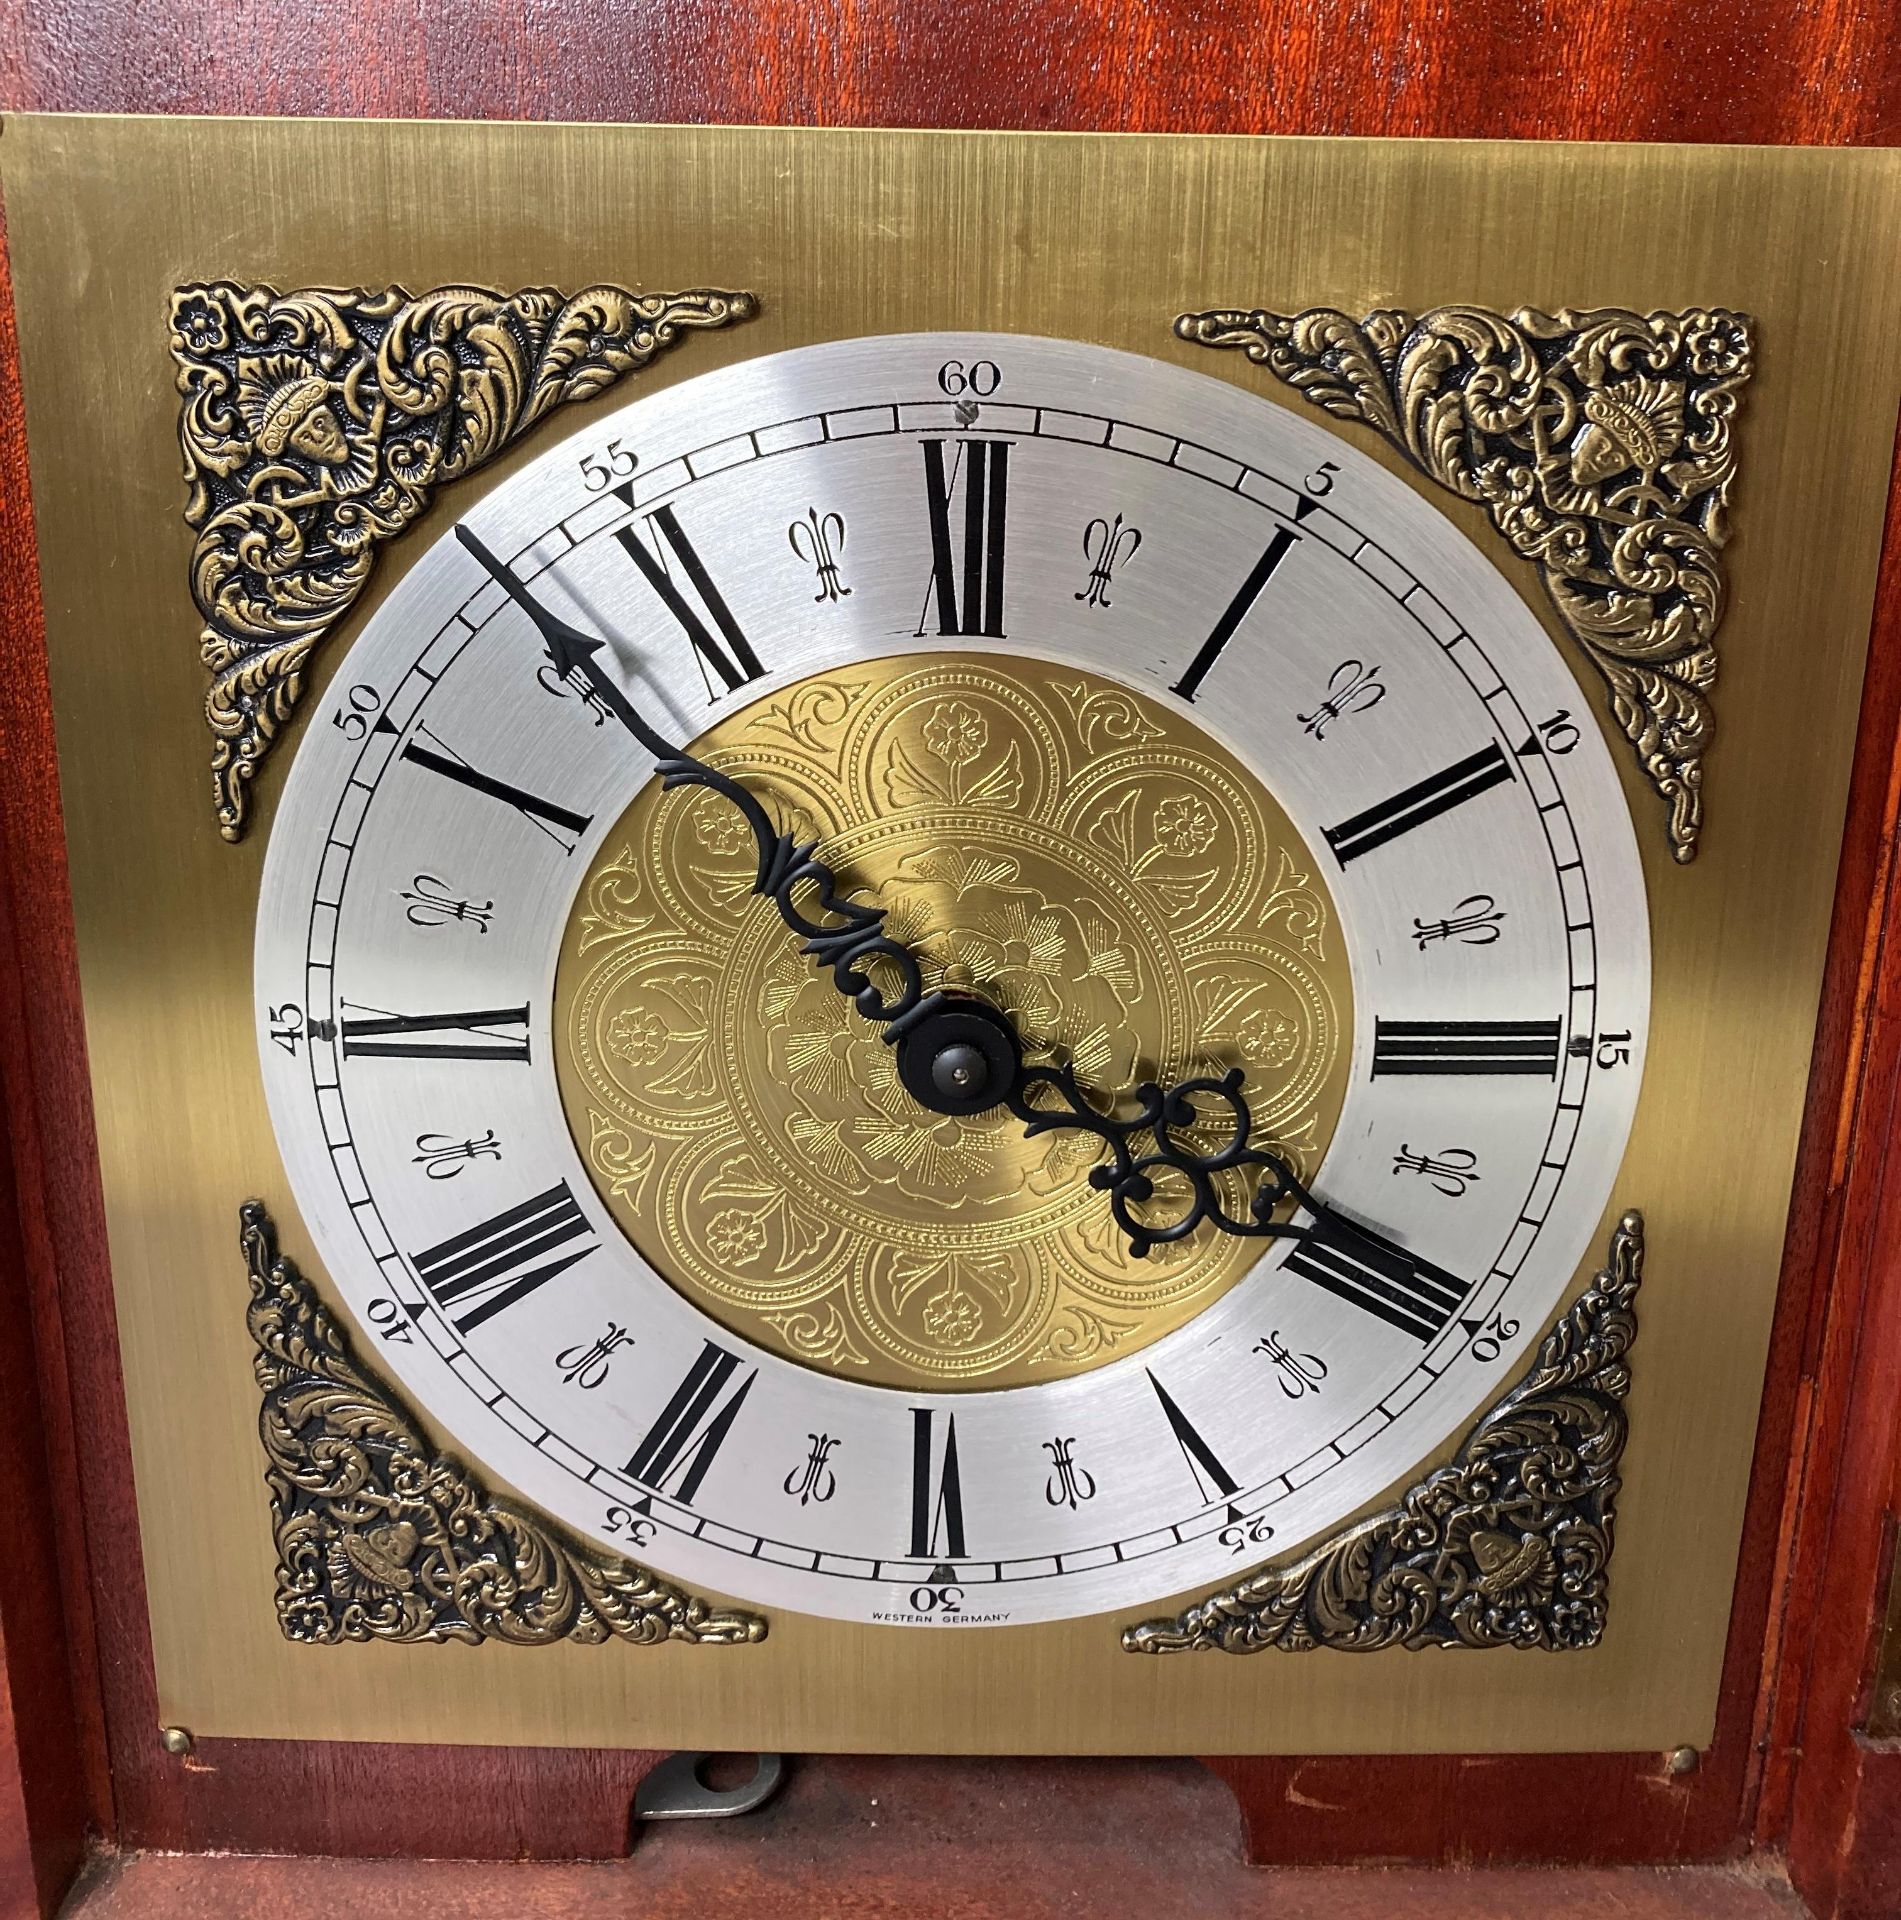 Mahogany cased West German mantel clock with brass face, - Image 2 of 3